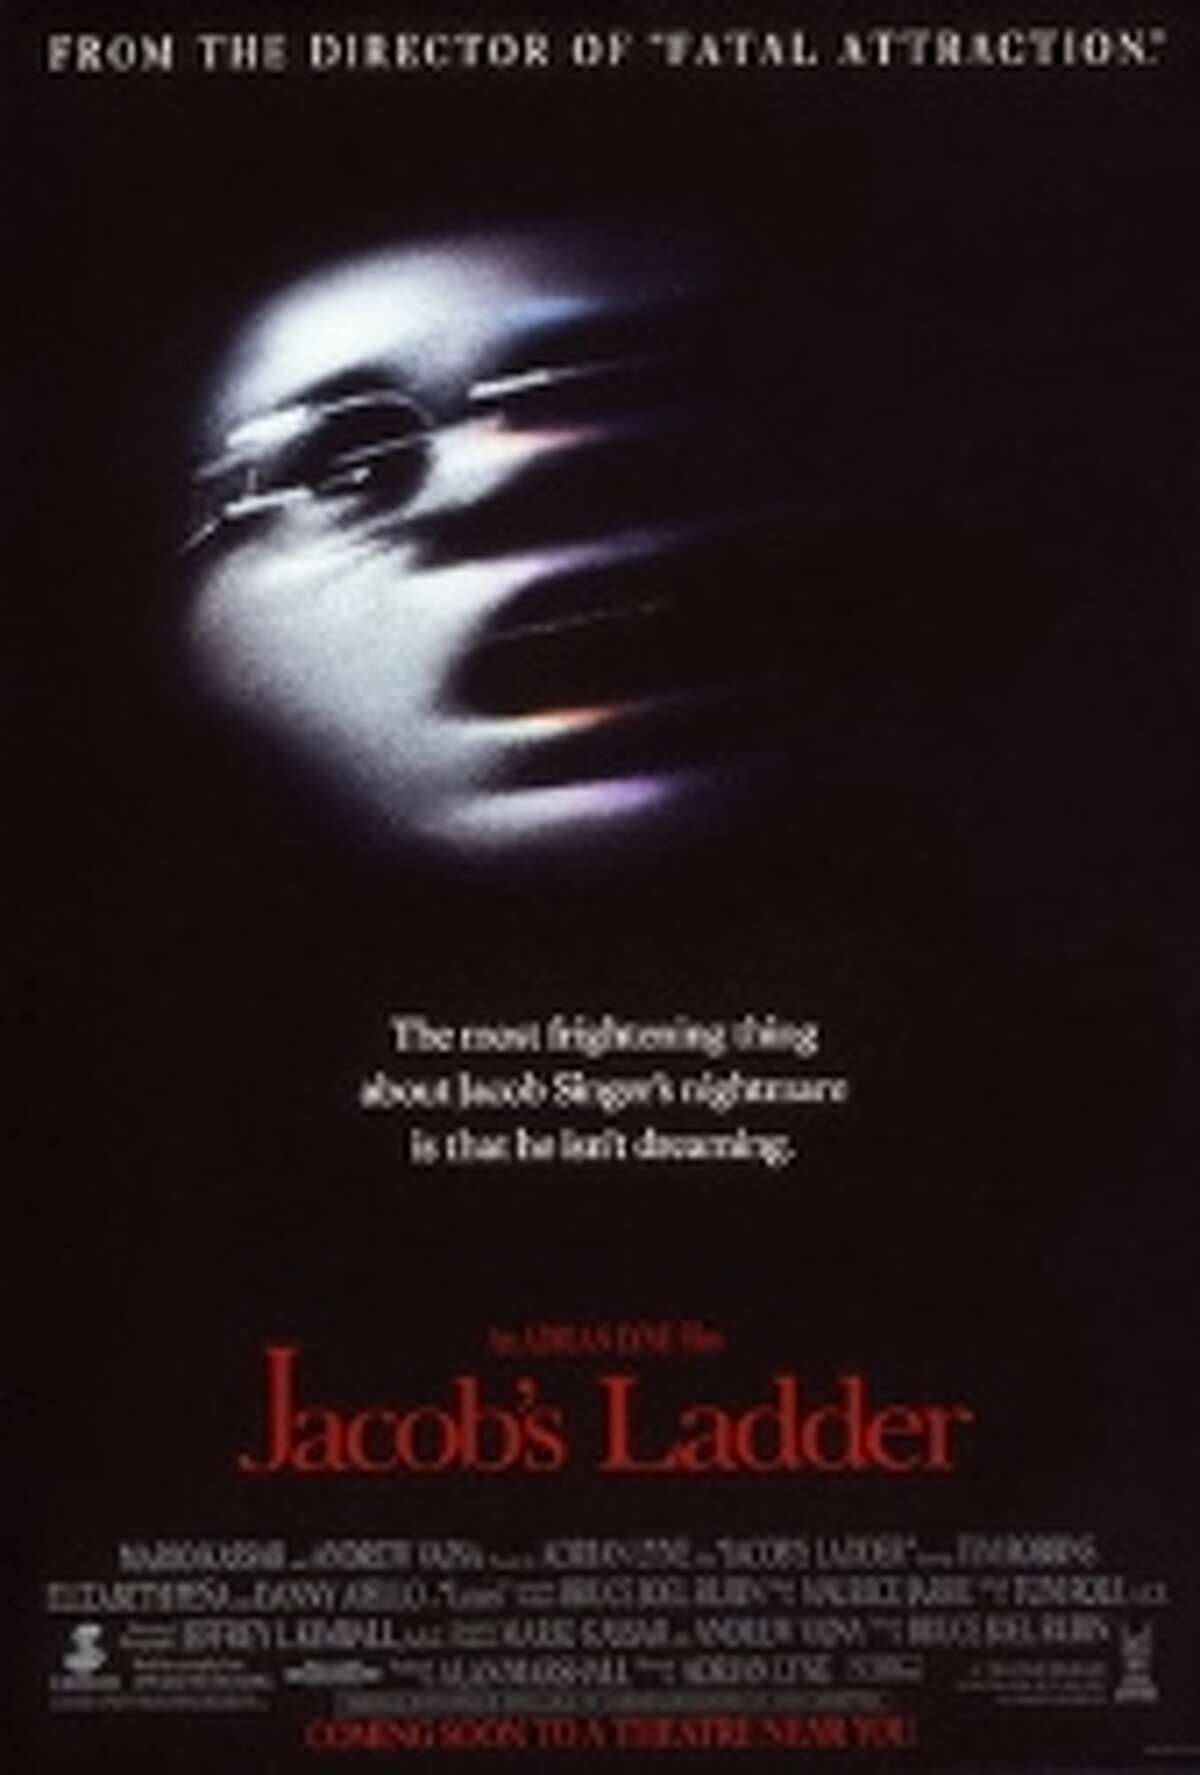 Jacob’s LadderA Vietnam War veteran (Tim Robbins) struggles with strange flashbacks and hallucinations until he can’t tell real life from his own dream. Directed by Adrian Lynn and featuring some of the most memorable body-horror ever put on celluloid, “Jacob’s Ladder” is rightfully considered a modern horror classic. But you better hurry: It leaves Prime on May 31.Stream it for free with your Amazon Prime Membership.